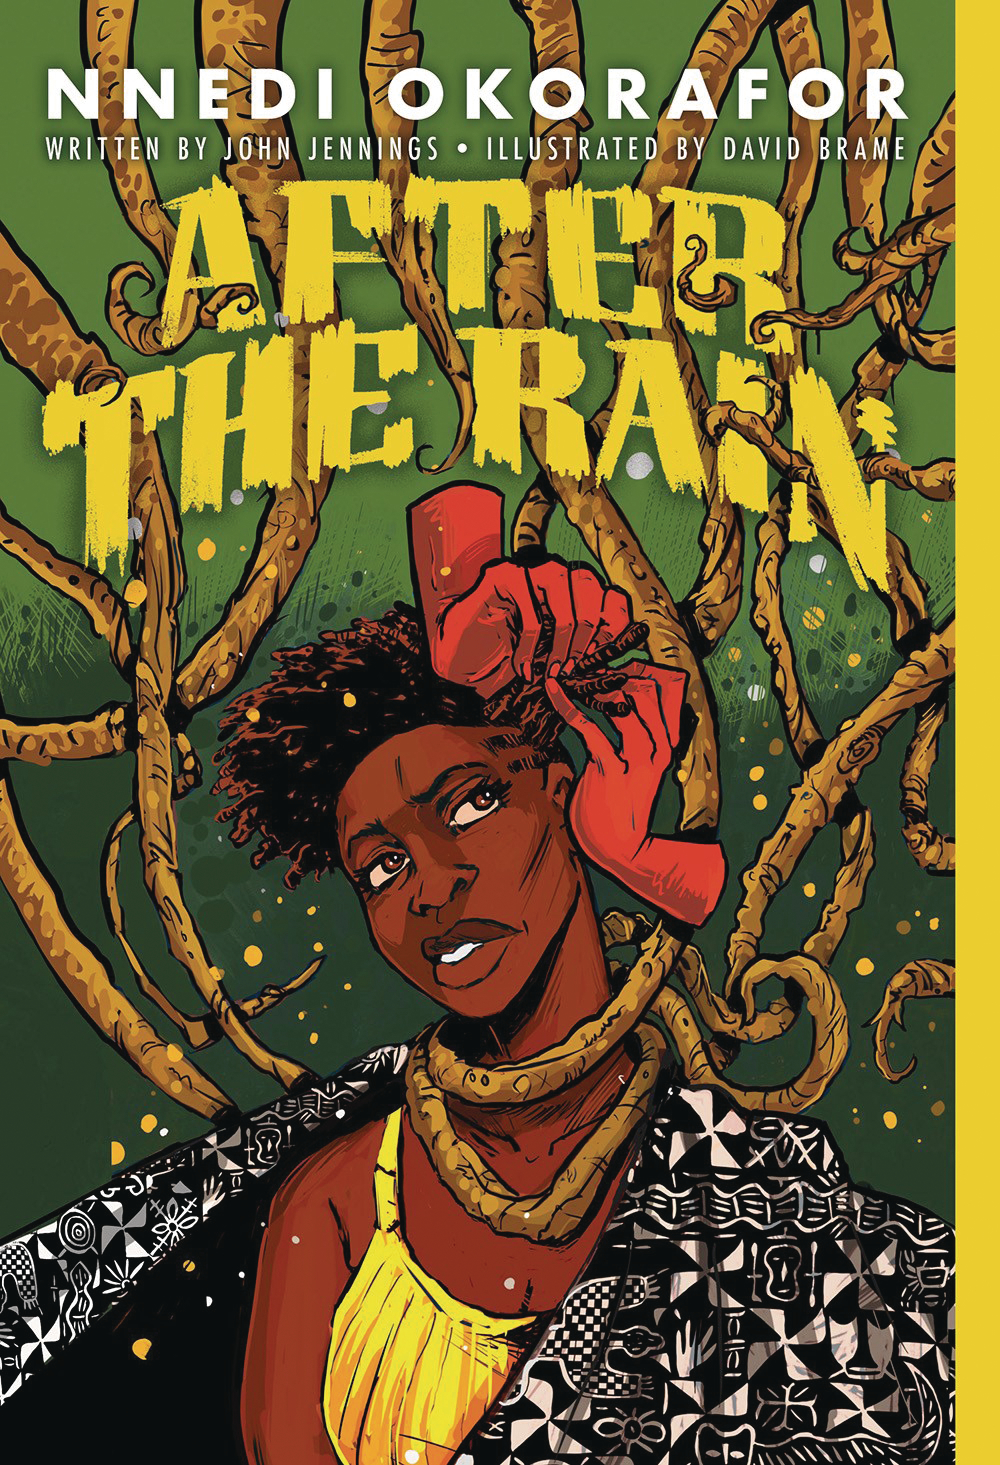 After The Rain Graphic Novel